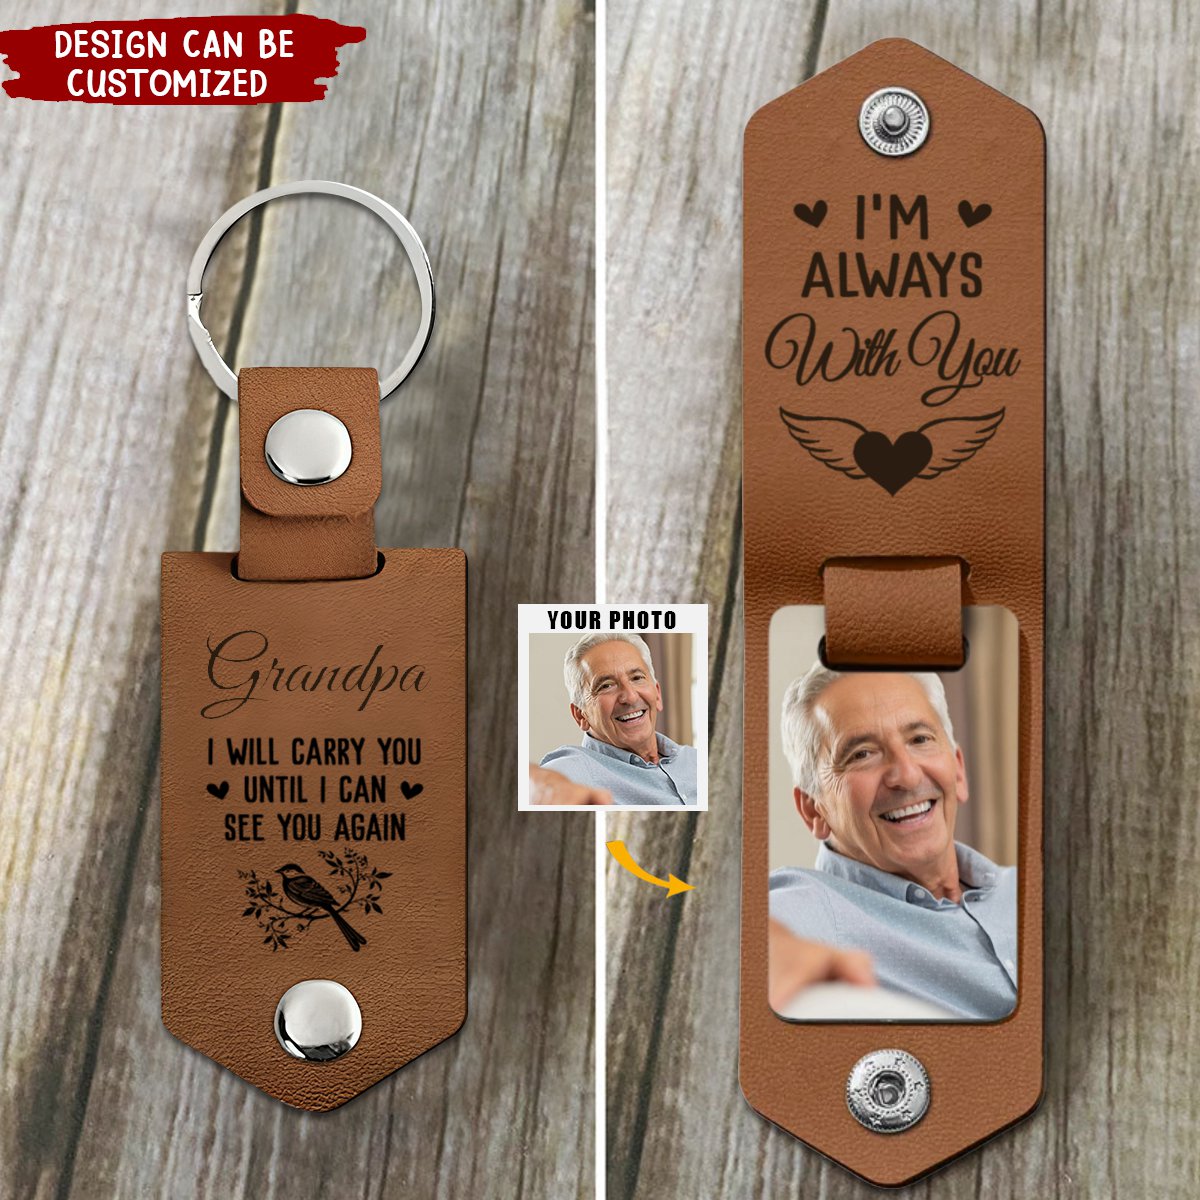 I Will Carry You Until I Can See You Again - Personalized Leather Photo Keychain